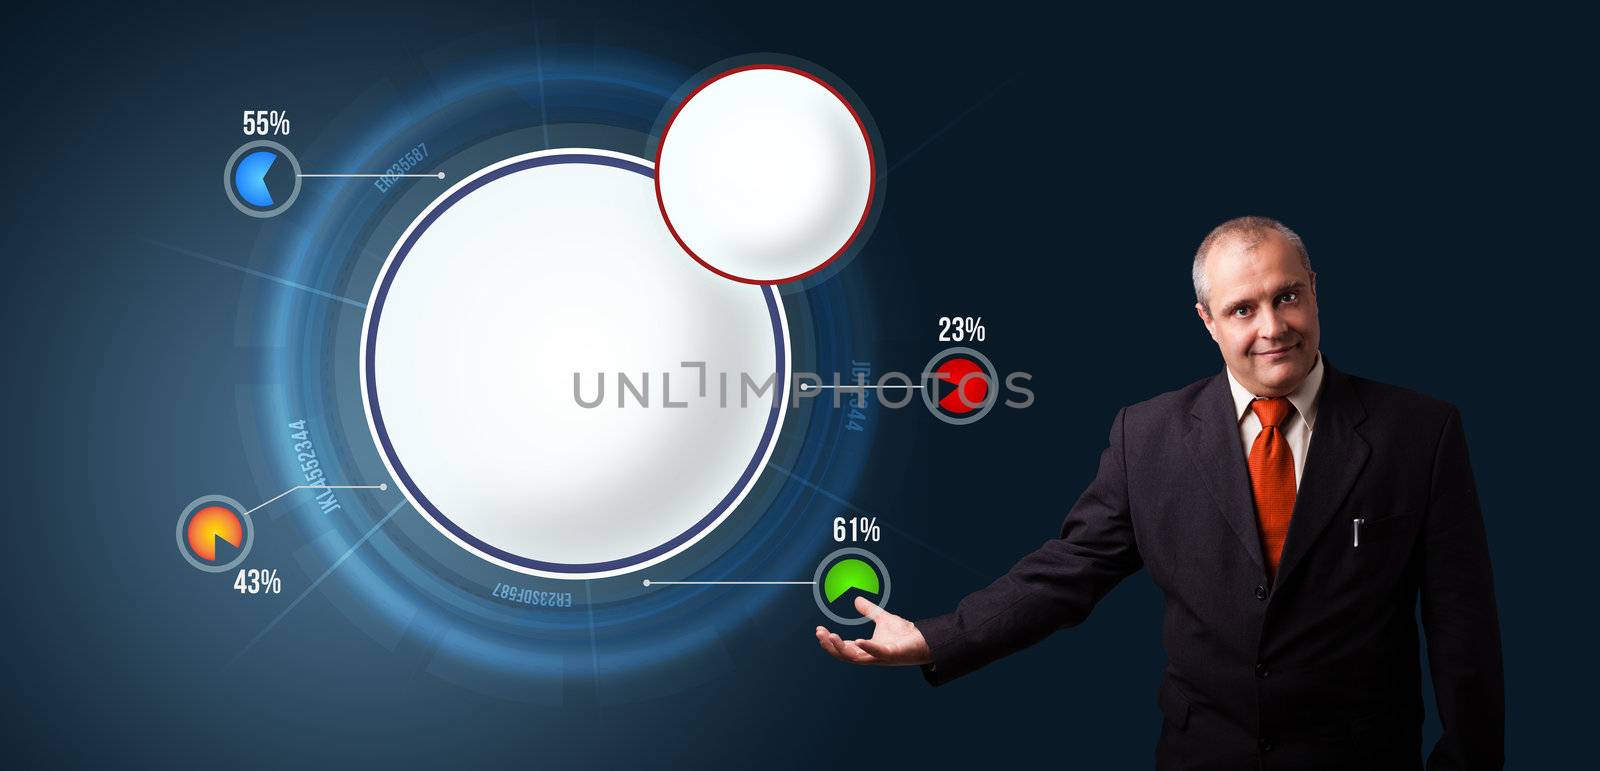 businessman in suit presenting abstract modern pie chart with copy space